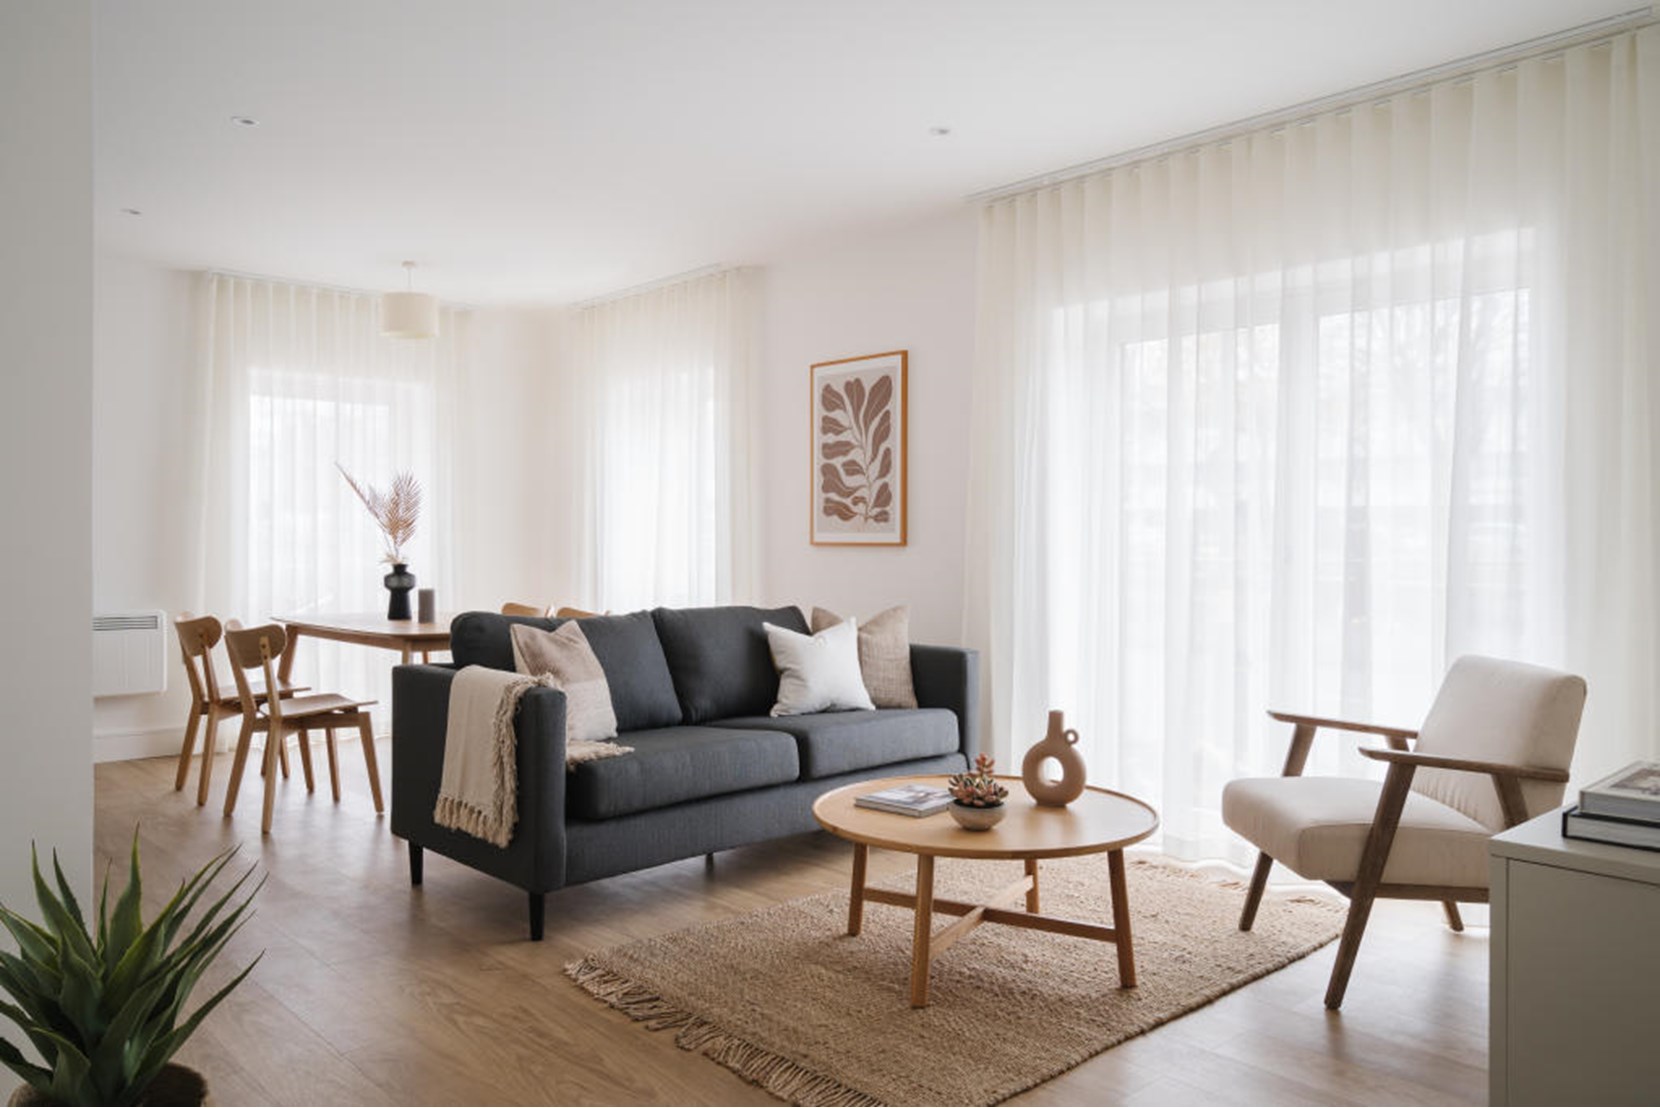 Apartments and houses to Rent by Heimstanden at Soho Wharf, Birmingham, B18, living area